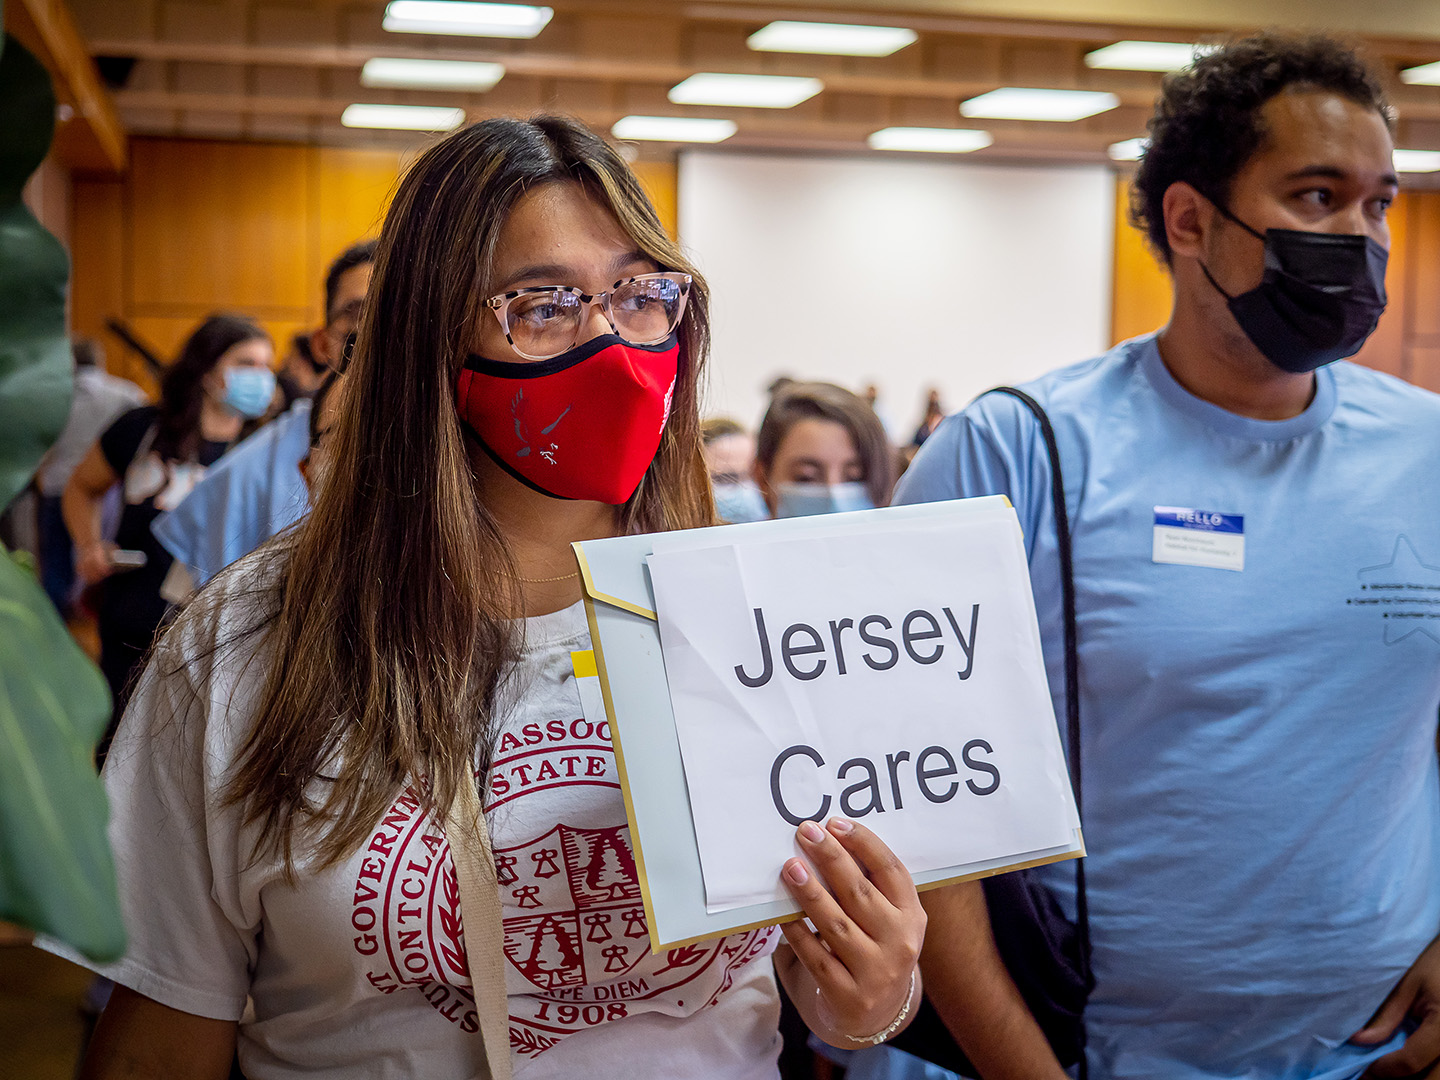 student wearing mask holding "Jersey Cares" sign